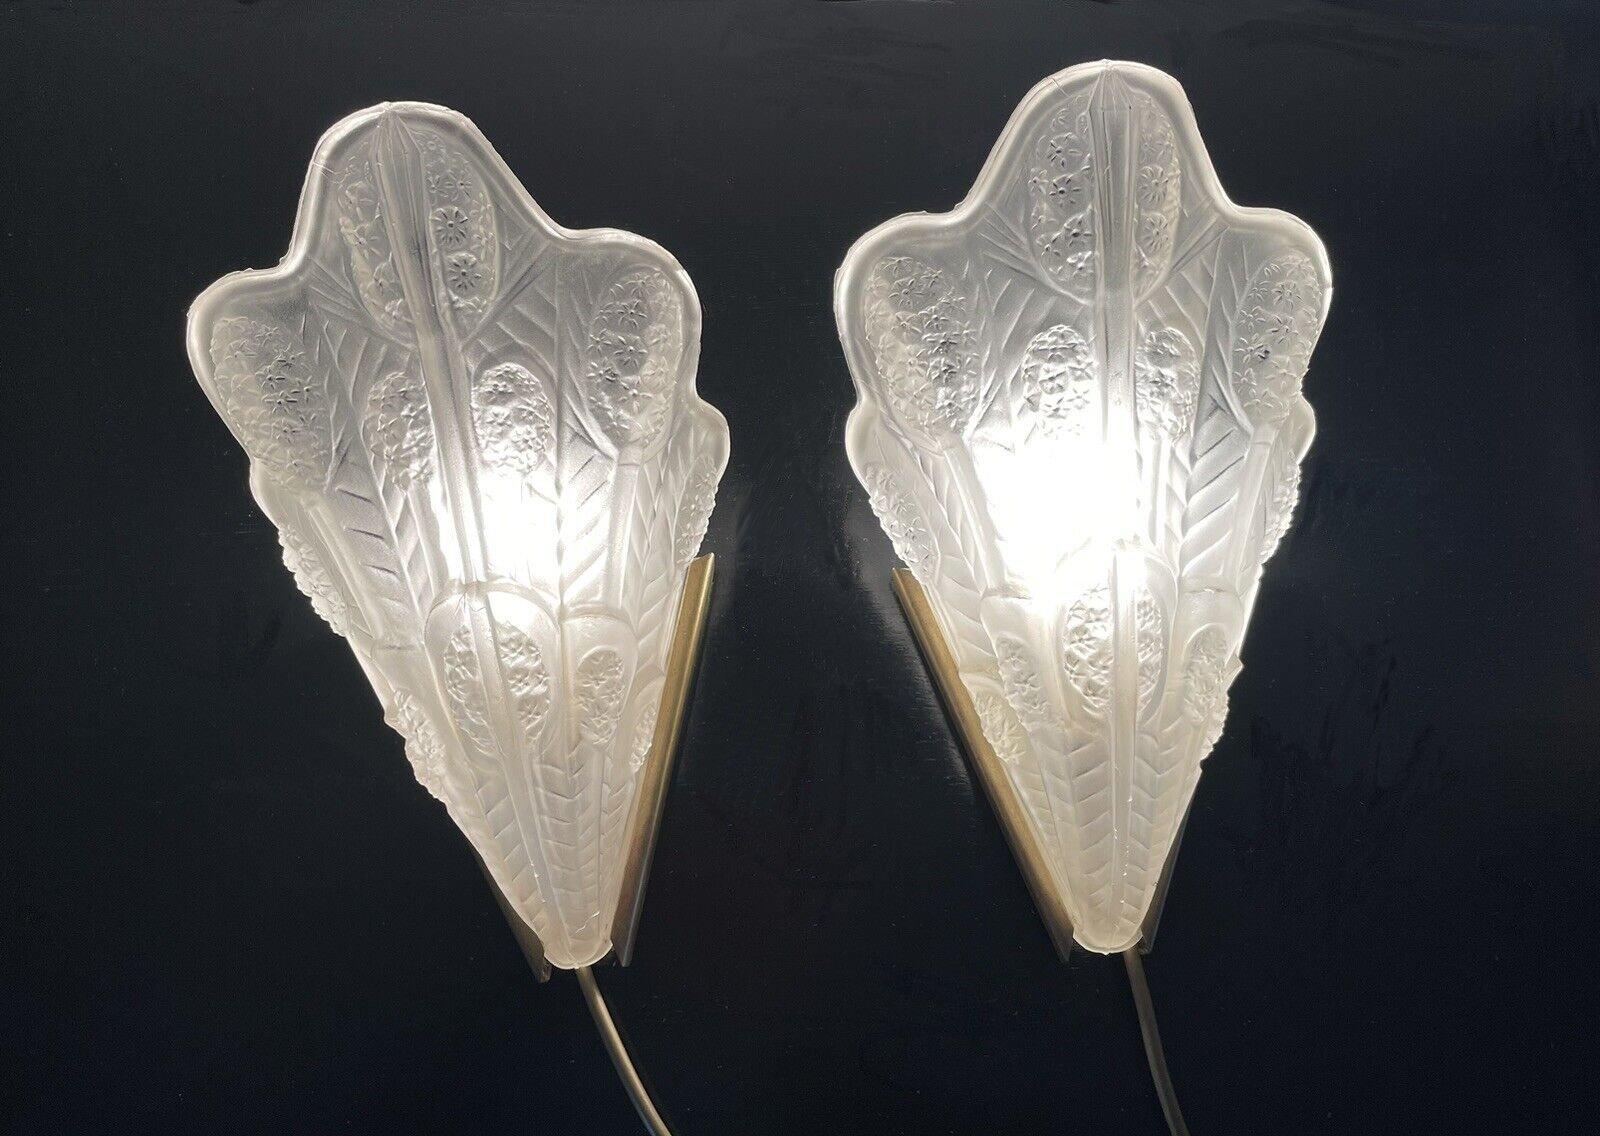 Art Deco Matching Pair of Wall Lights, 1930's, French In Good Condition For Sale In Devon, England